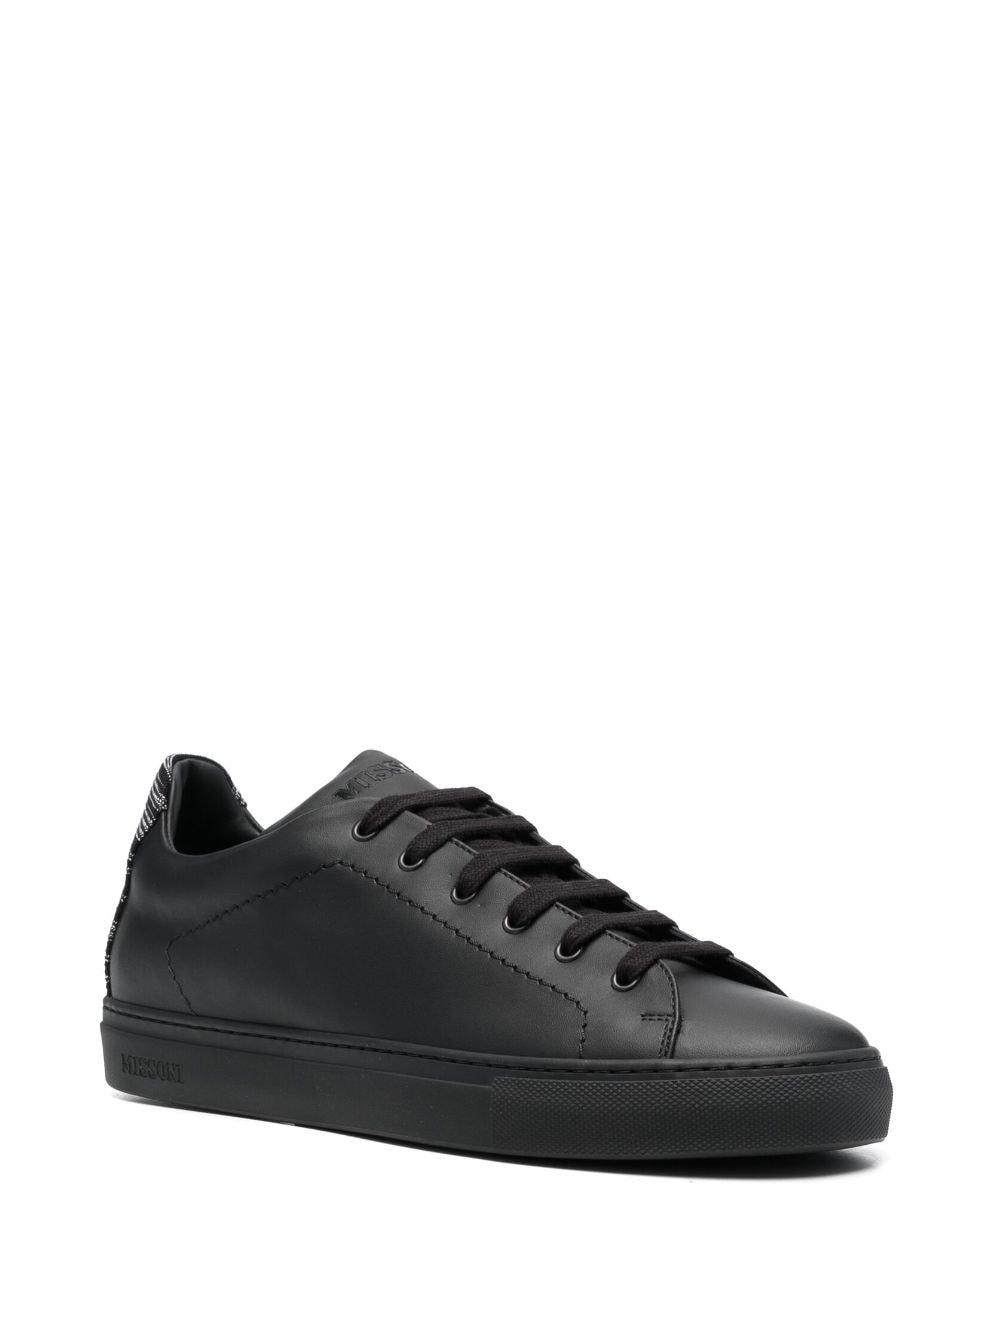 woven-heel counter leather sneakers - 2